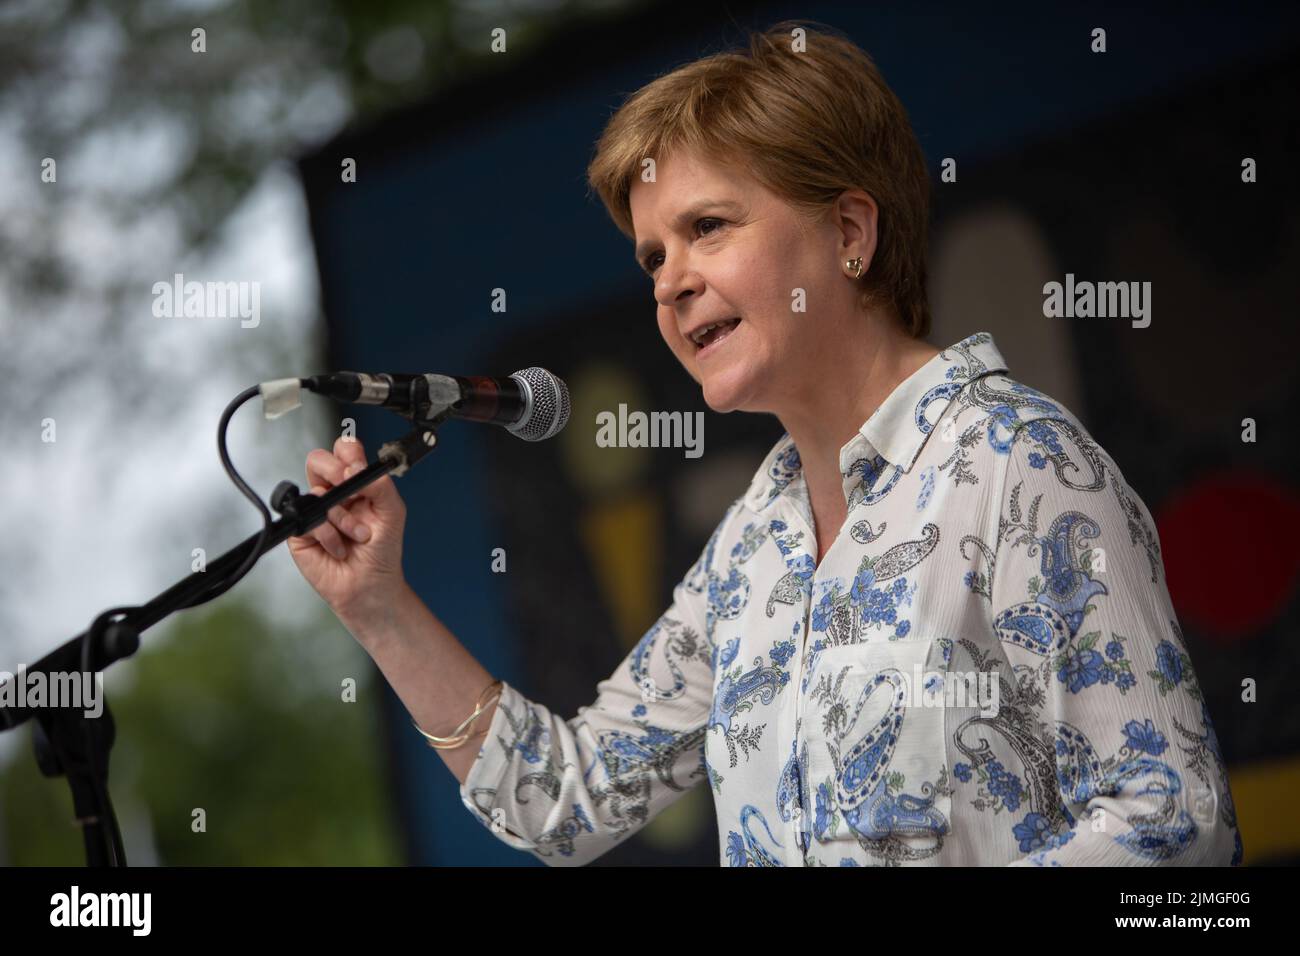 Glasgow, UK, 6th August 2022. Scottish First Minister Nicola Sturgeon made an appearance and short speech to open the Govanhill International Festival and Carnival in Queen’s Park, in Glasgow, Scotland, 6 August 2022. Photo credit: Jeremy Sutton-Hibbert/Alamy Live News. Stock Photo